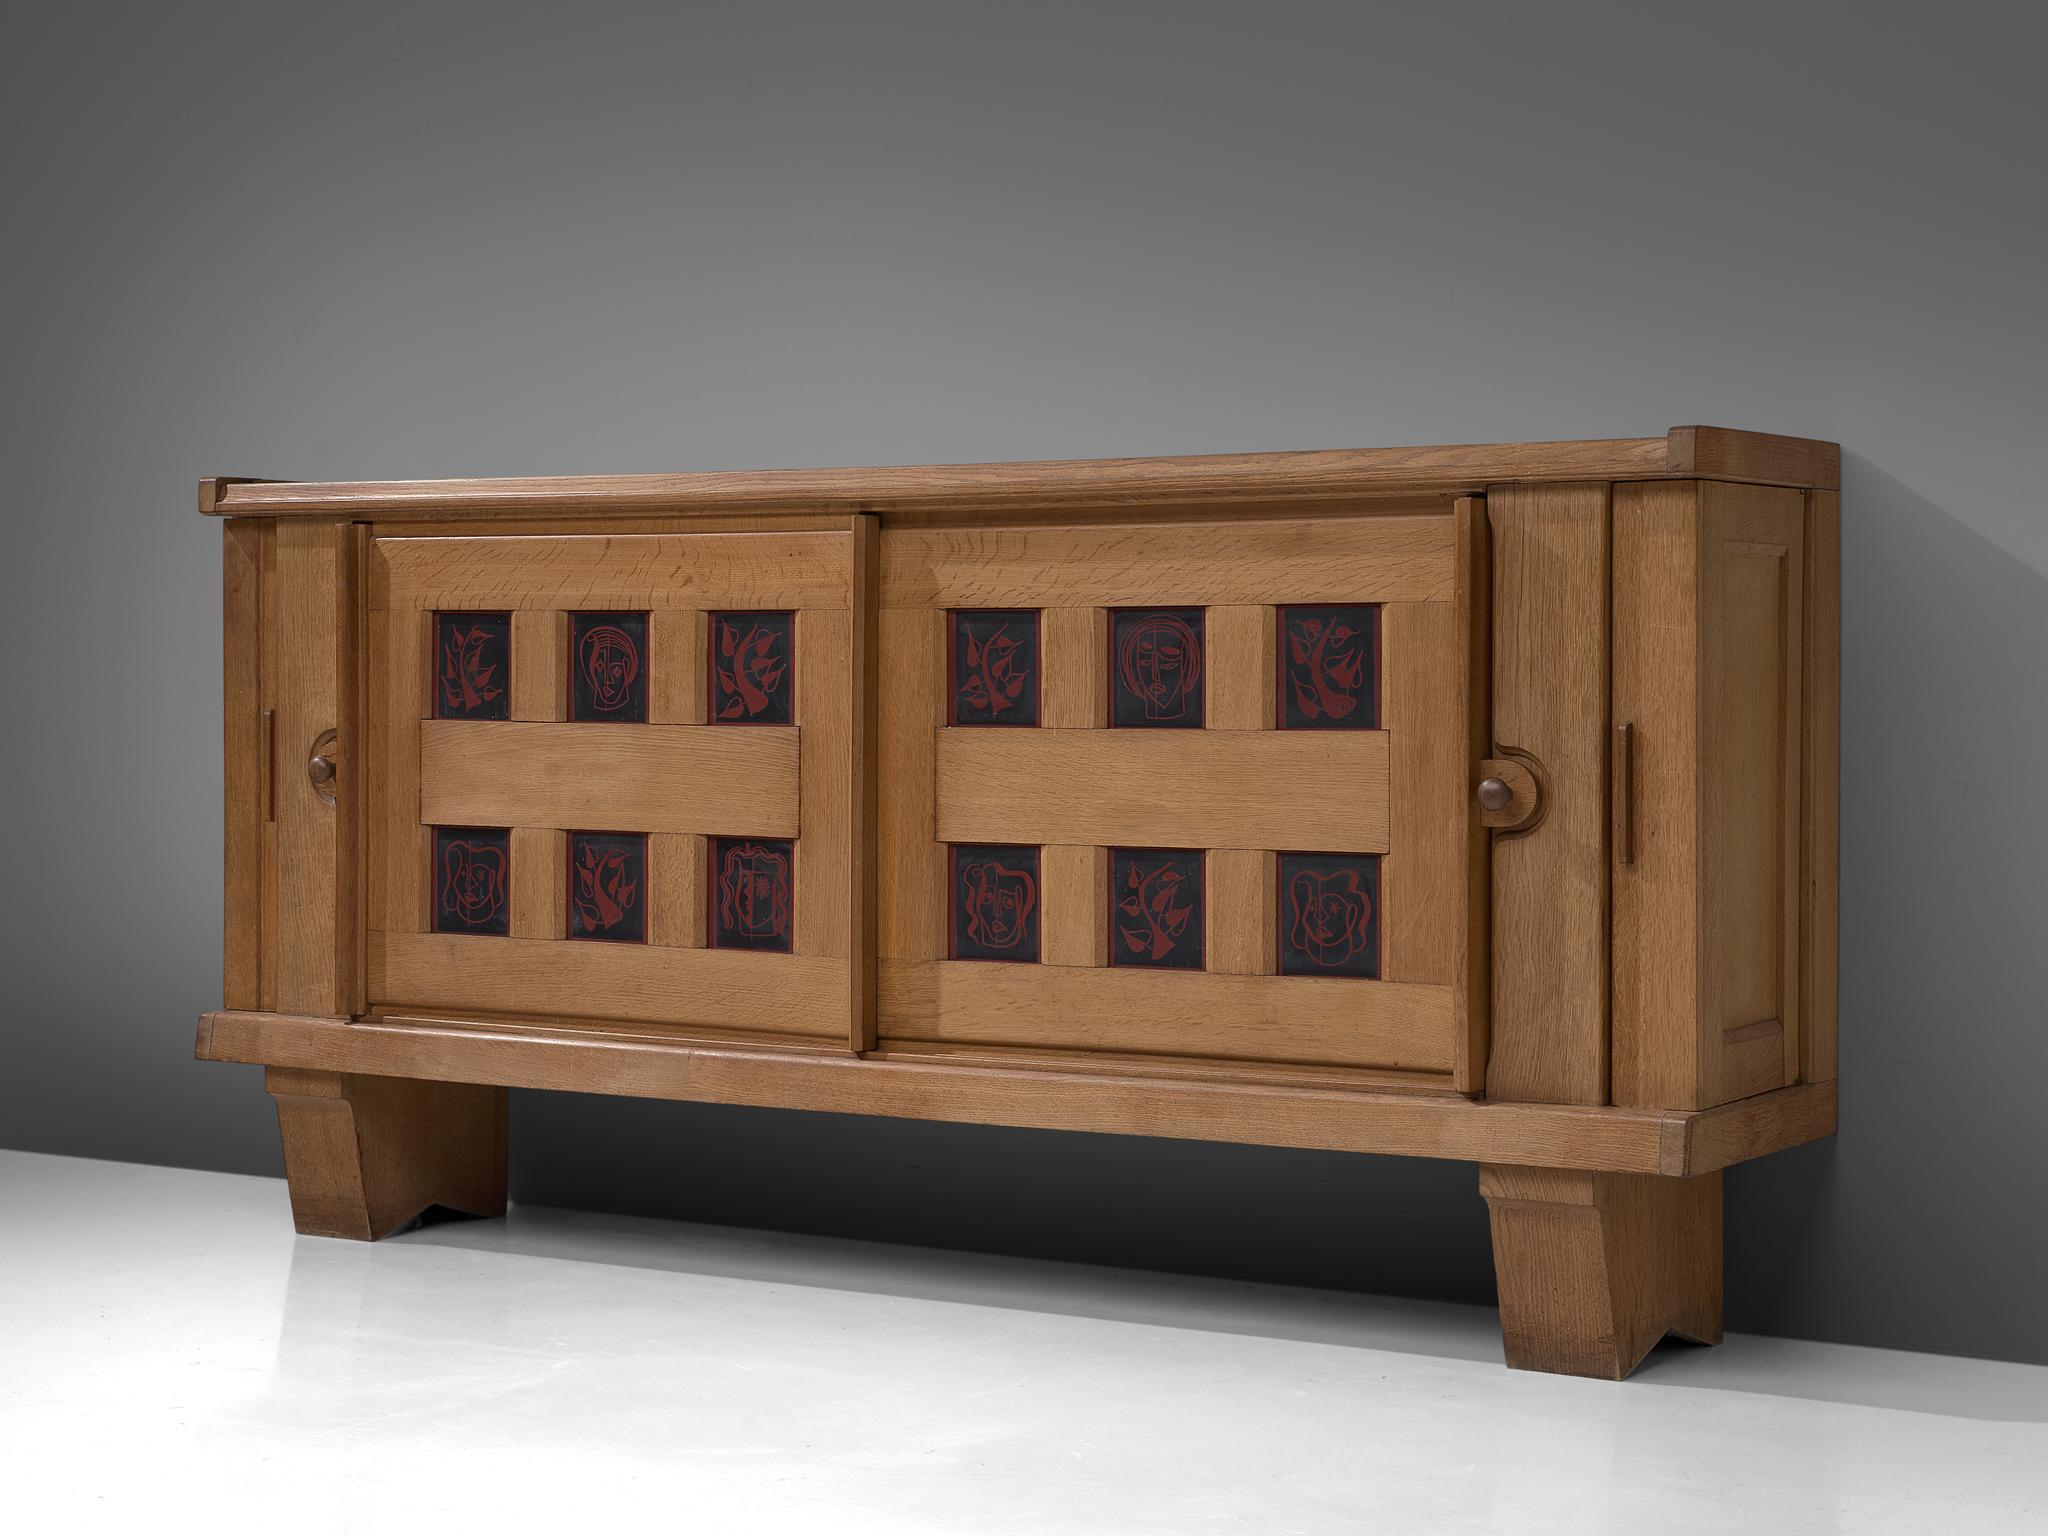 Guillerme et Chambron for Votre Maison, credenza in oak and ceramic, France, 1960s.

This well proportioned sideboard is designed by French designer duo Guillerme and Chambron. The piece is characterized by the solid oakwood and ceramic